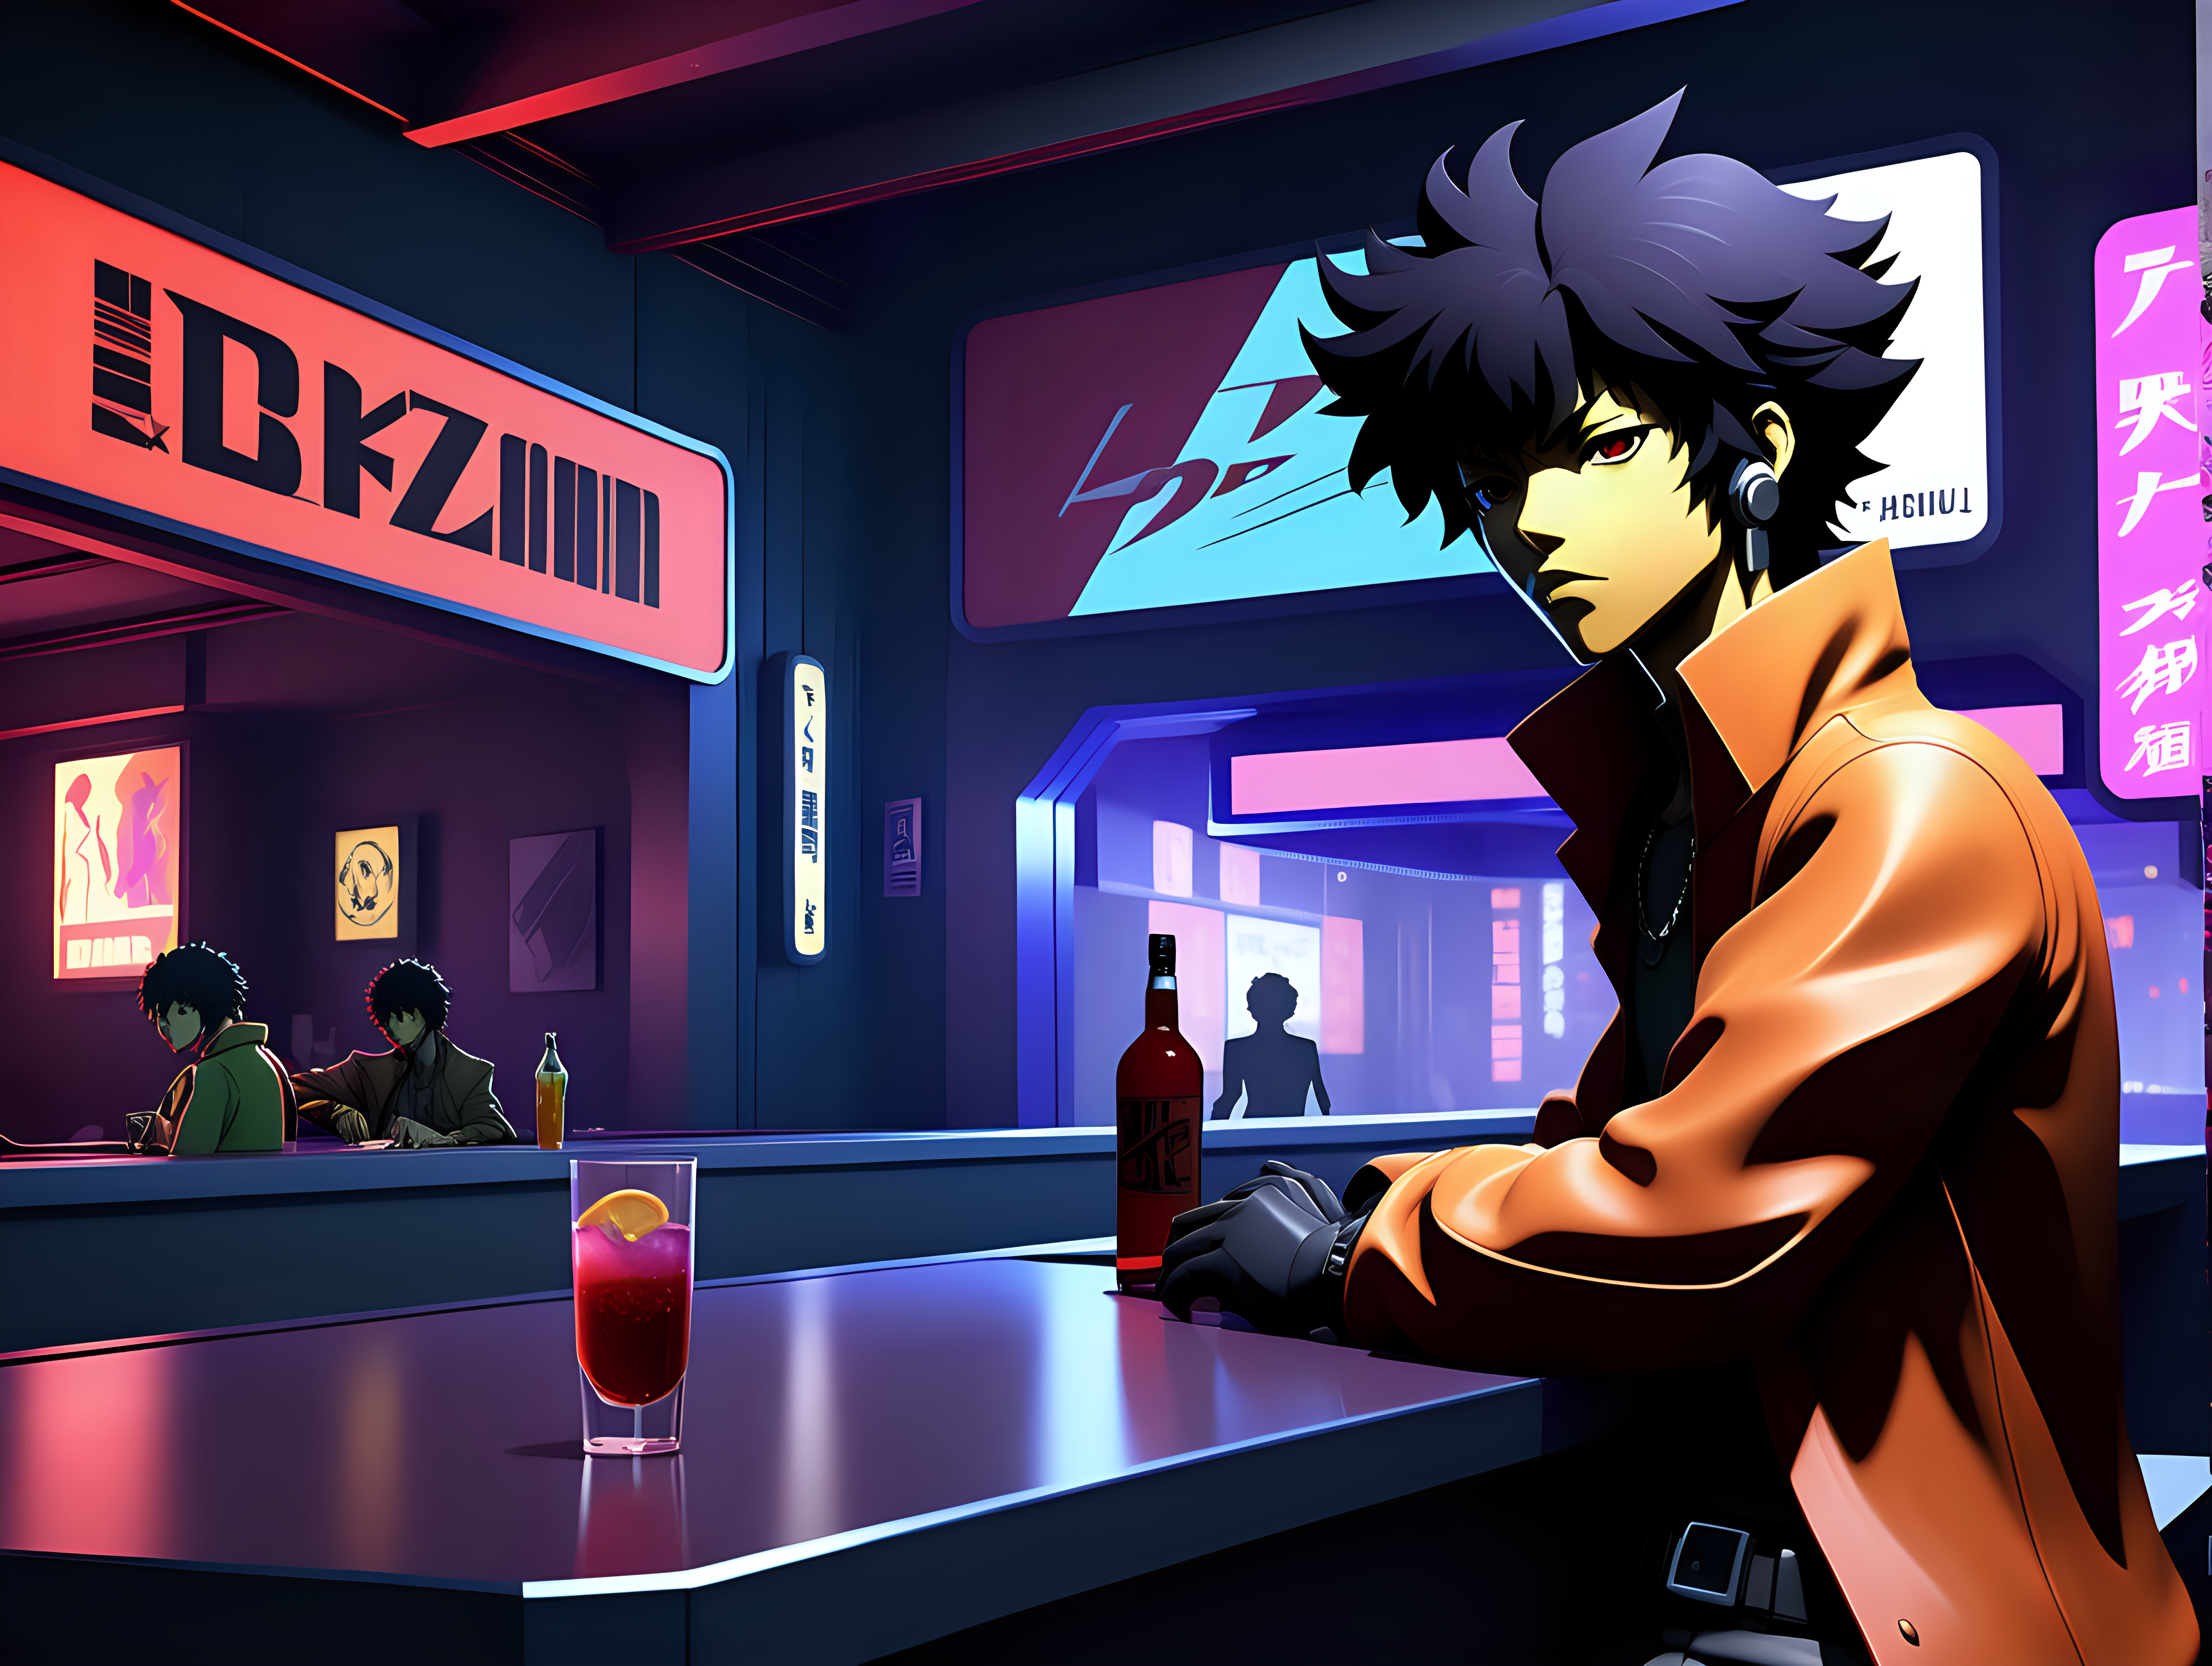 Generate concept art for a JRPG with a jazz-infused soundtrack and an aesthetic inspired by Persona, Cowboy Bebop, and Akira. The scene should prominently feature the main character in the front, along with supporting characters, in a vibrant urban environment, specifically in a futuristic bar or nightclub with elements of futuristic technology and a touch of noir.

Incorporate smooth low-poly graphics reminiscent of the PS1 era, capturing the essence of classic JRPGs. The art style should draw inspiration from the stylish and dynamic visuals of Persona, the gritty cyberpunk atmosphere of Akira, and the jazzy, adventurous feel of Cowboy Bebop. Set the scene in a bustling city with neon lights, futuristic architecture, and a jazz club or district.

Highlight the main and supporting characters in a way that reflects their personalities and the overall tone of the game. The soundtrack should evoke the soulful and improvisational spirit of jazz, setting the mood for the JRPG adventure.

Embrace the fusion of futuristic technology, jazz influences, and the captivating aesthetics of Persona, Cowboy Bebop, and Akira, delivering a visually stunning and immersive concept for a JRPG with a futuristic bar or nightclub background, prominently featuring the main character in the front.